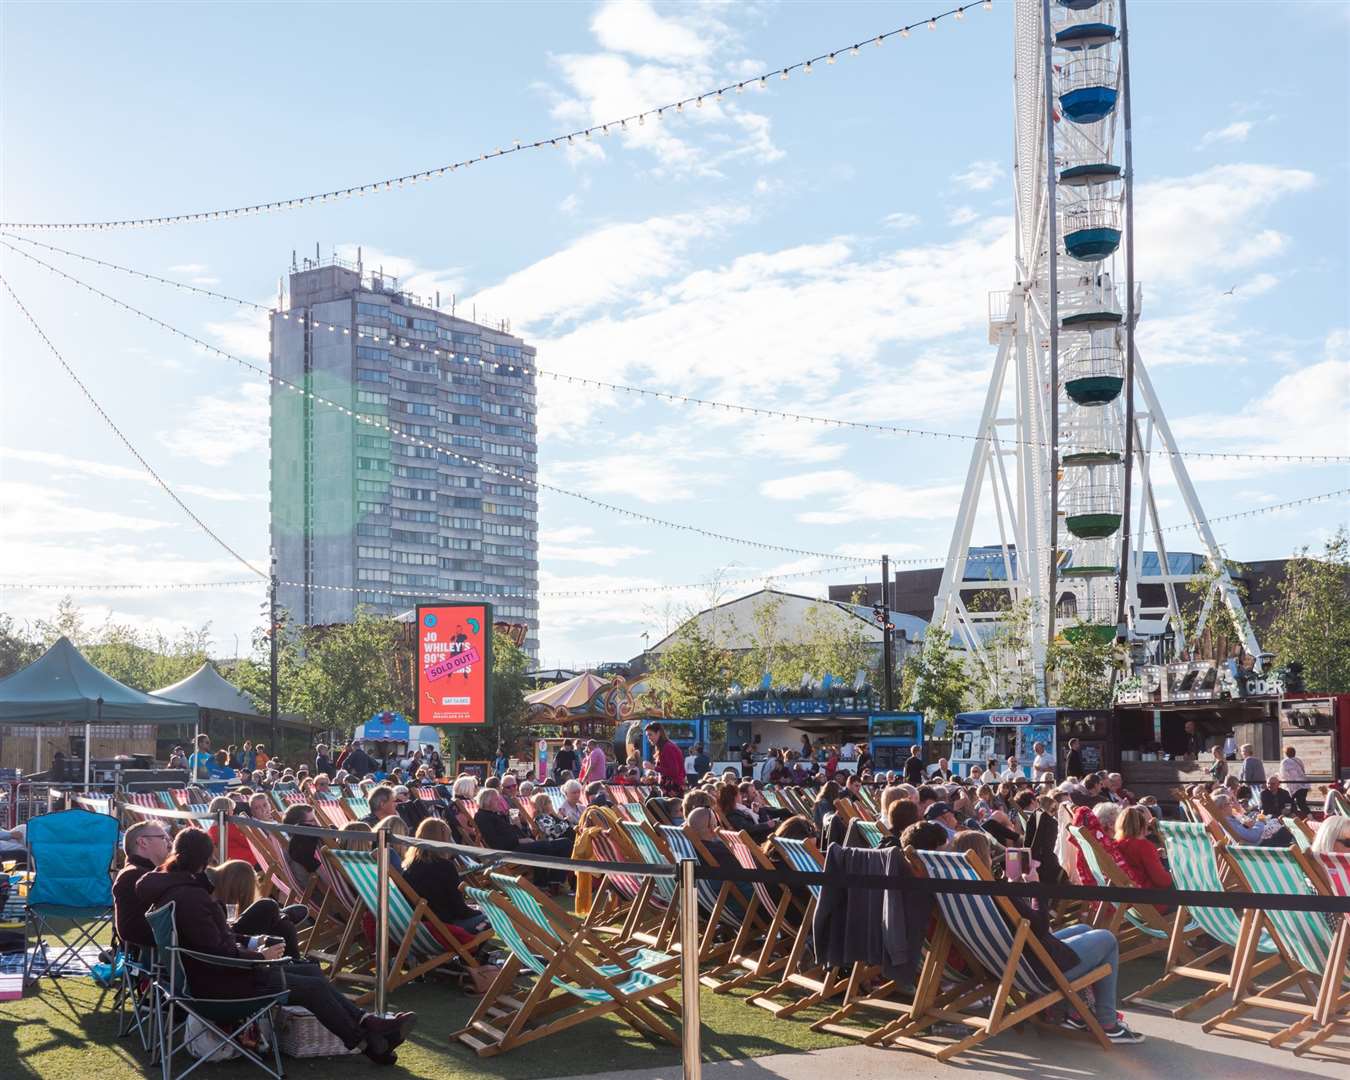 The outdoor cinema at Dreamland is due to start later this month. Picture: Dreamland (13700108)